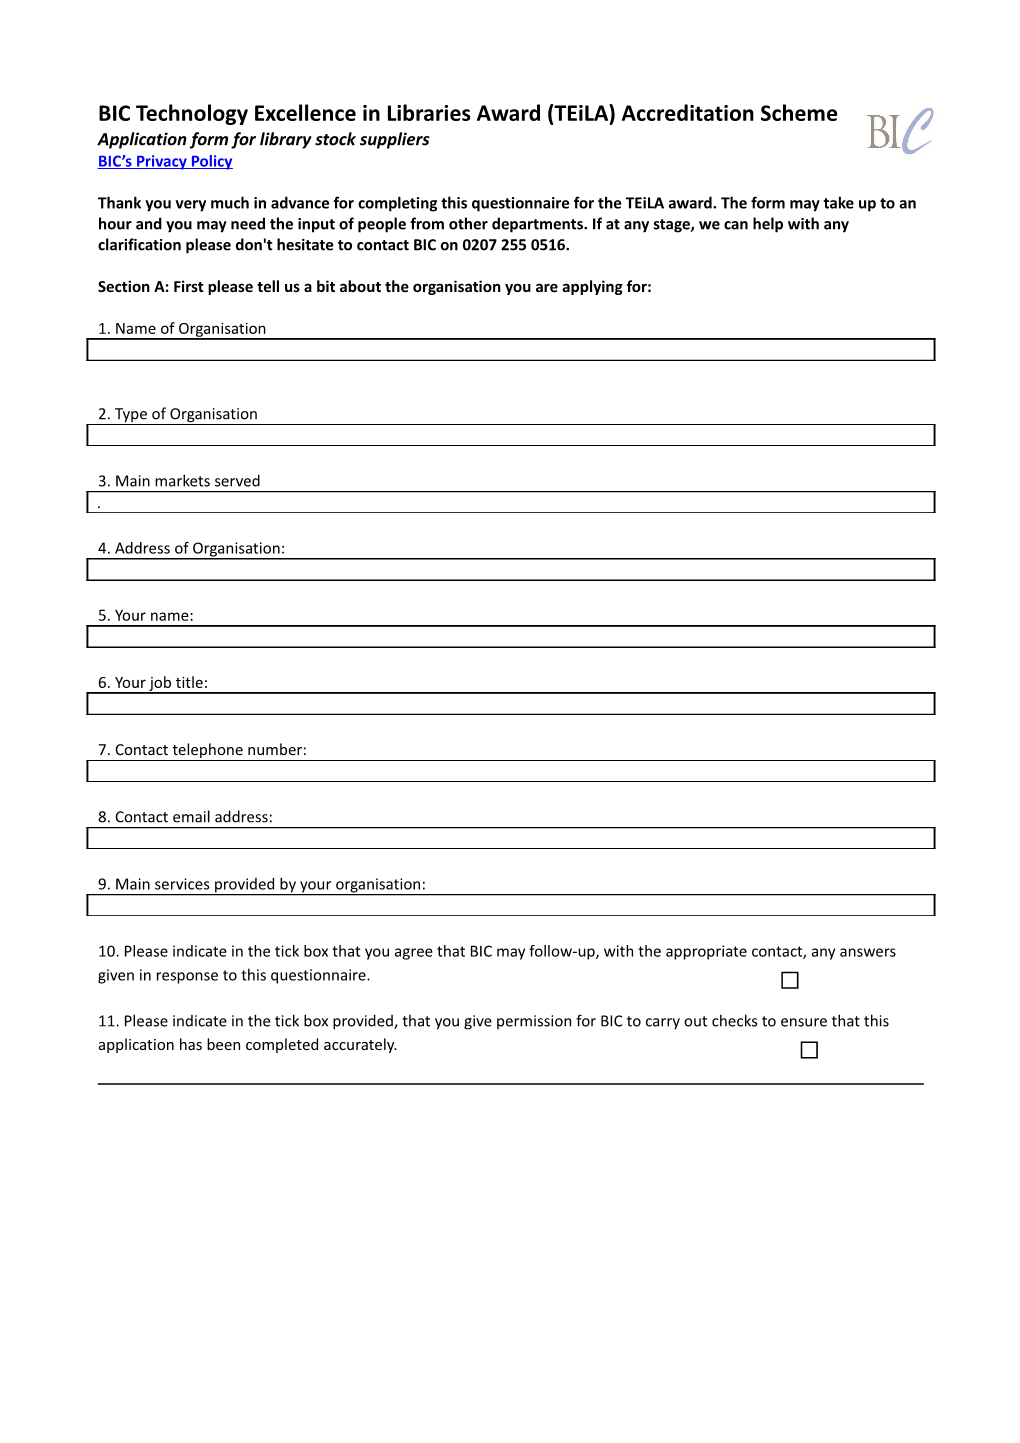 Application Form for Library Stock Suppliers